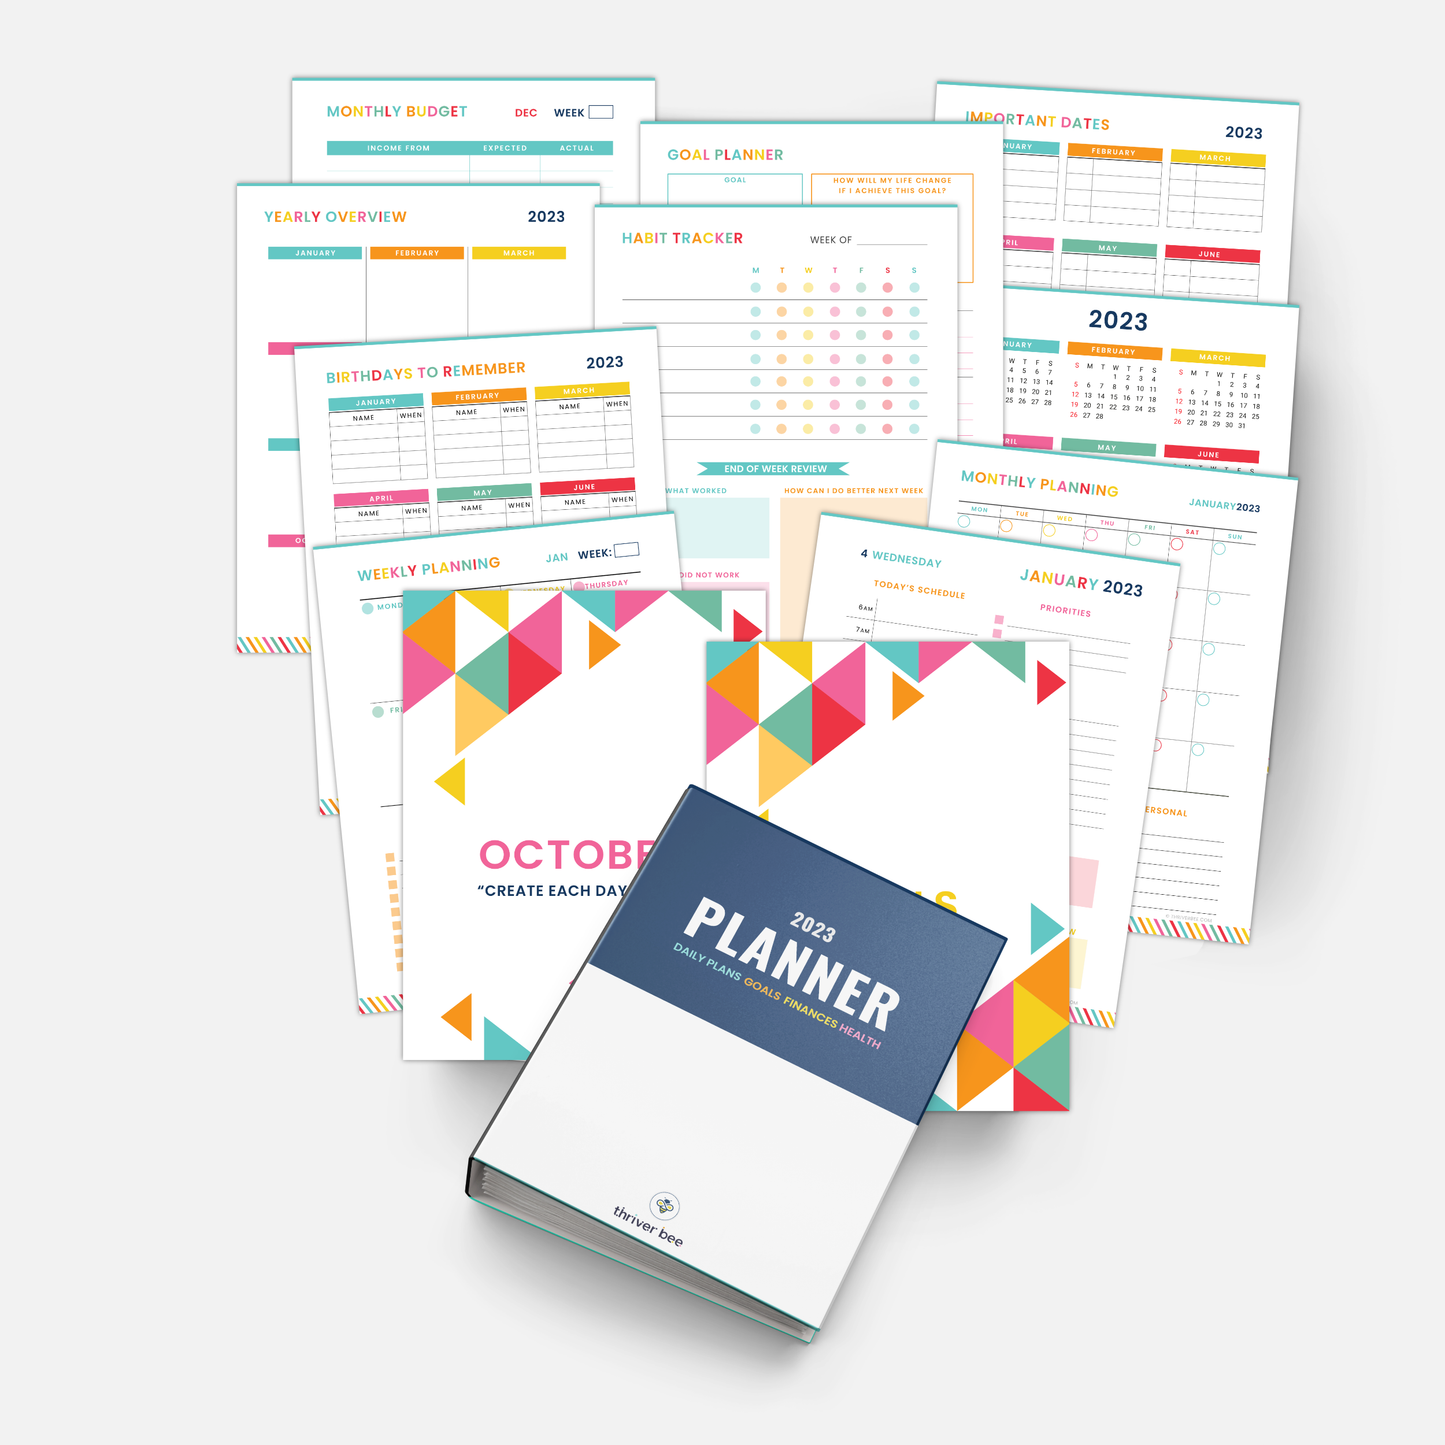 FREE 2023 & 2024 Planner Binder {1000+ Pages}